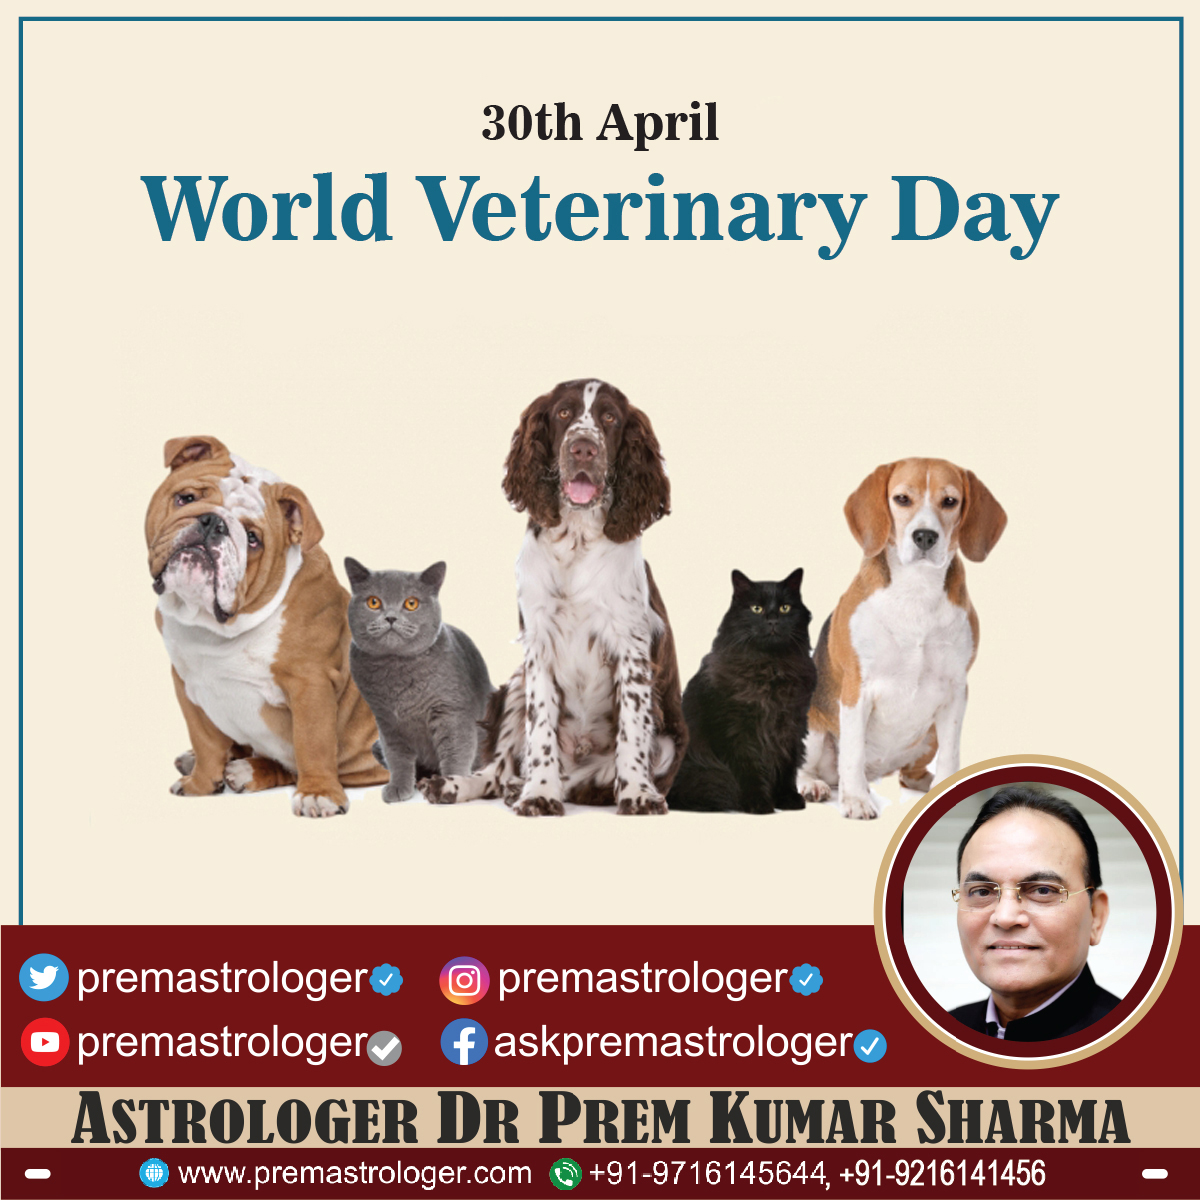 On World Veterinary Day, let's honor those who dedicate their lives to the welfare of animals. Their unwavering compassion & expertise touch countless lives, reminding us of the profound bond between humans & animals. Gratitude to these selfless caregivers! 

#WorldVeterinaryDay